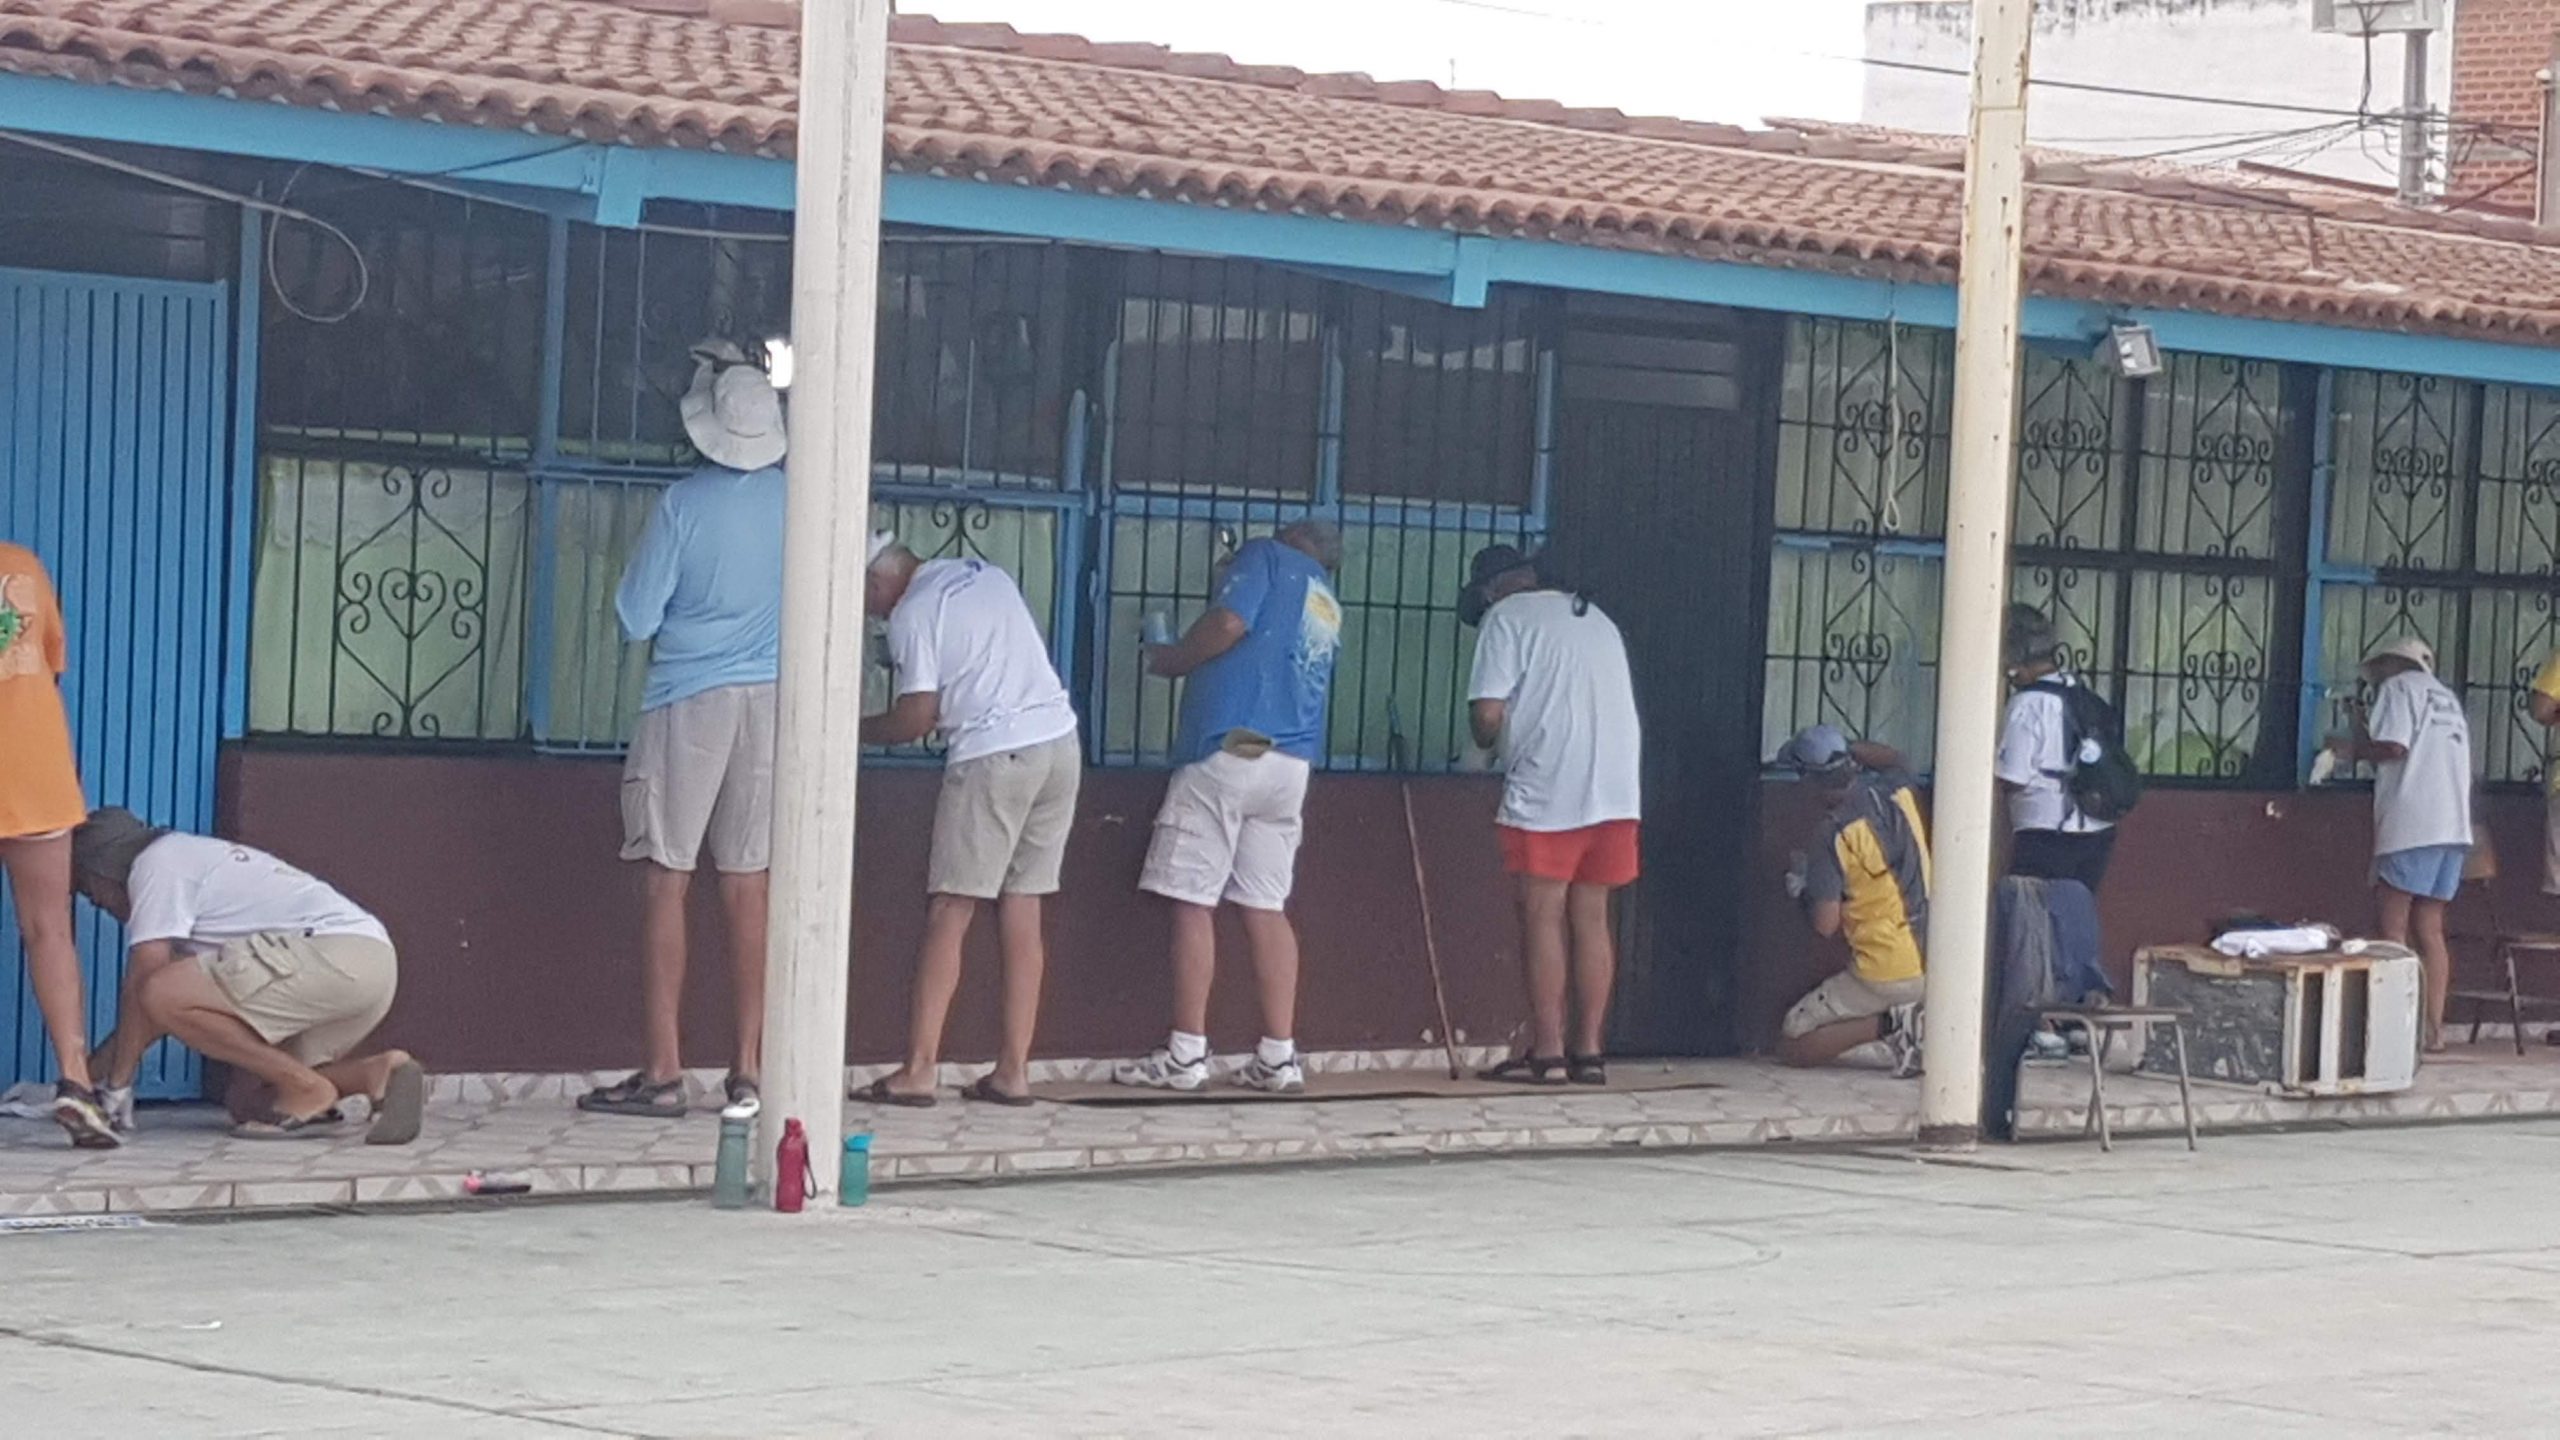 Painting the schools in Barra